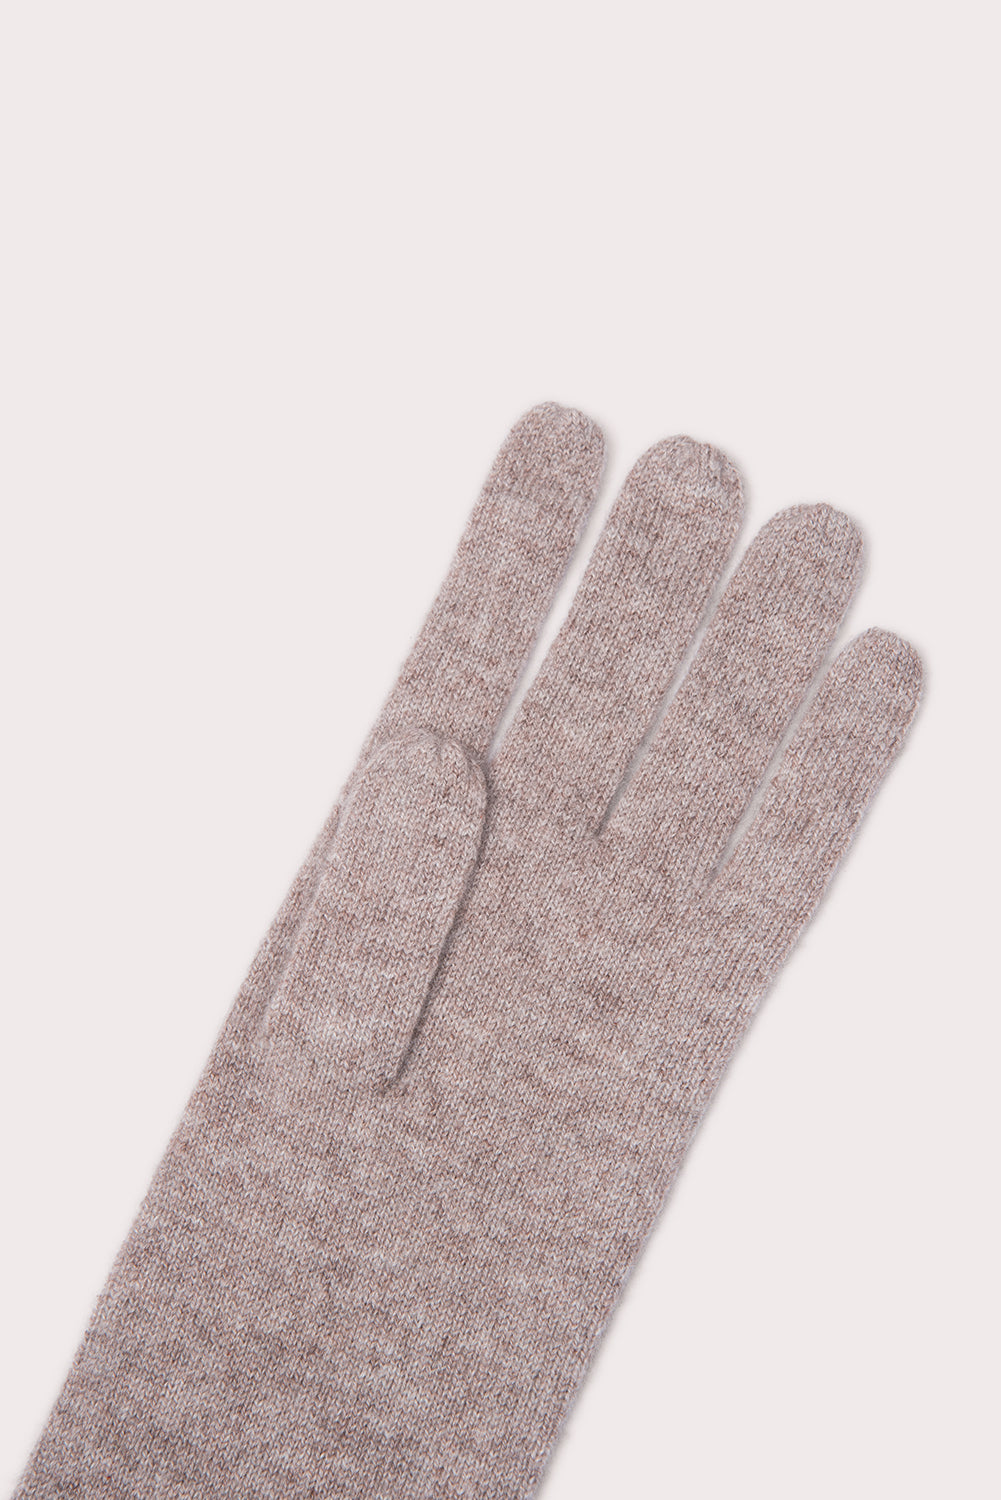 Linz Gloves Taupe Cashmere